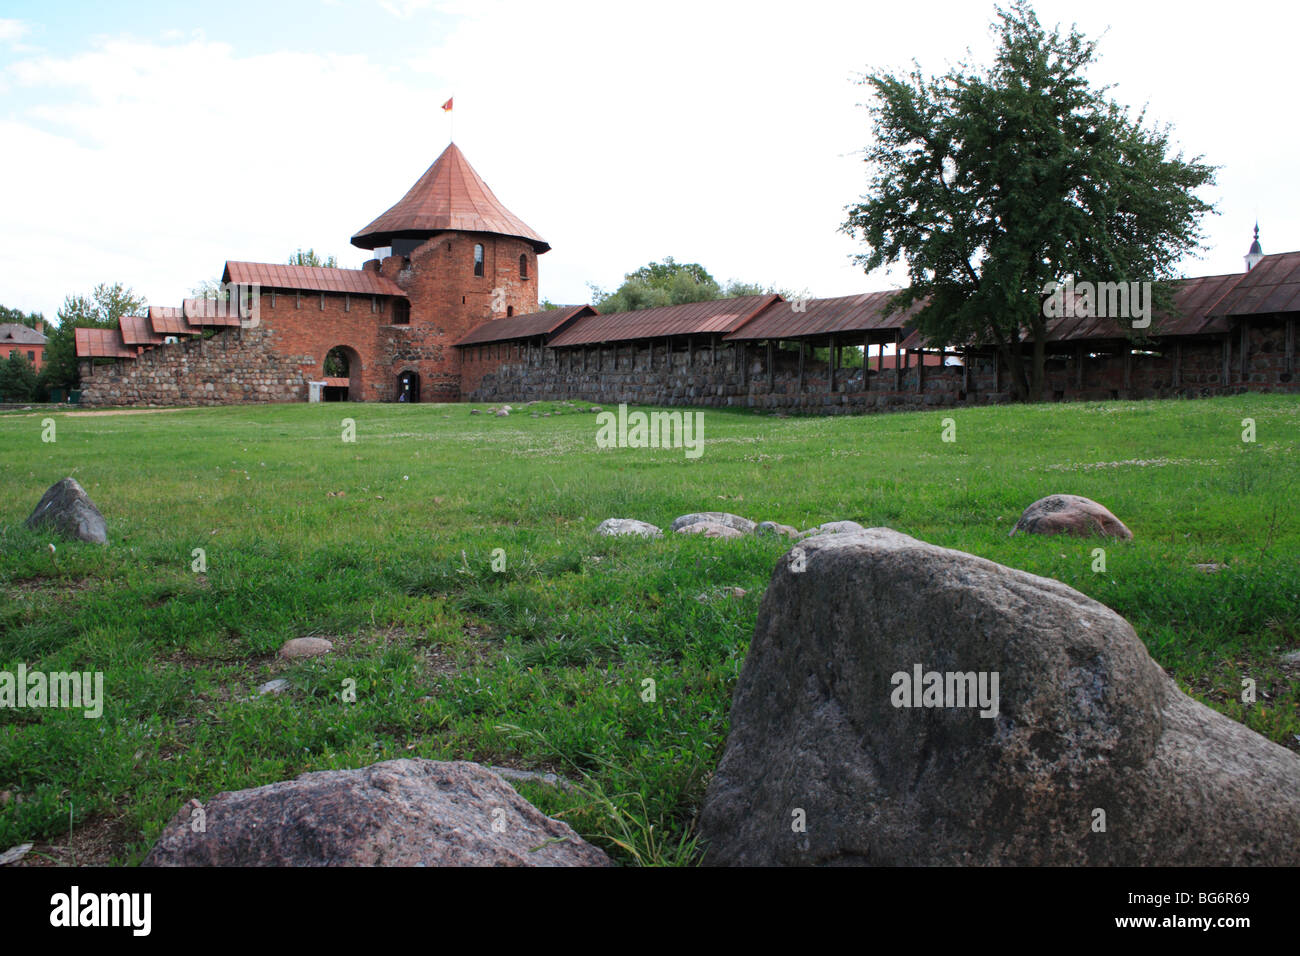 Ruins of the old royal castle in Kaunas, Lithuania Stock Photo